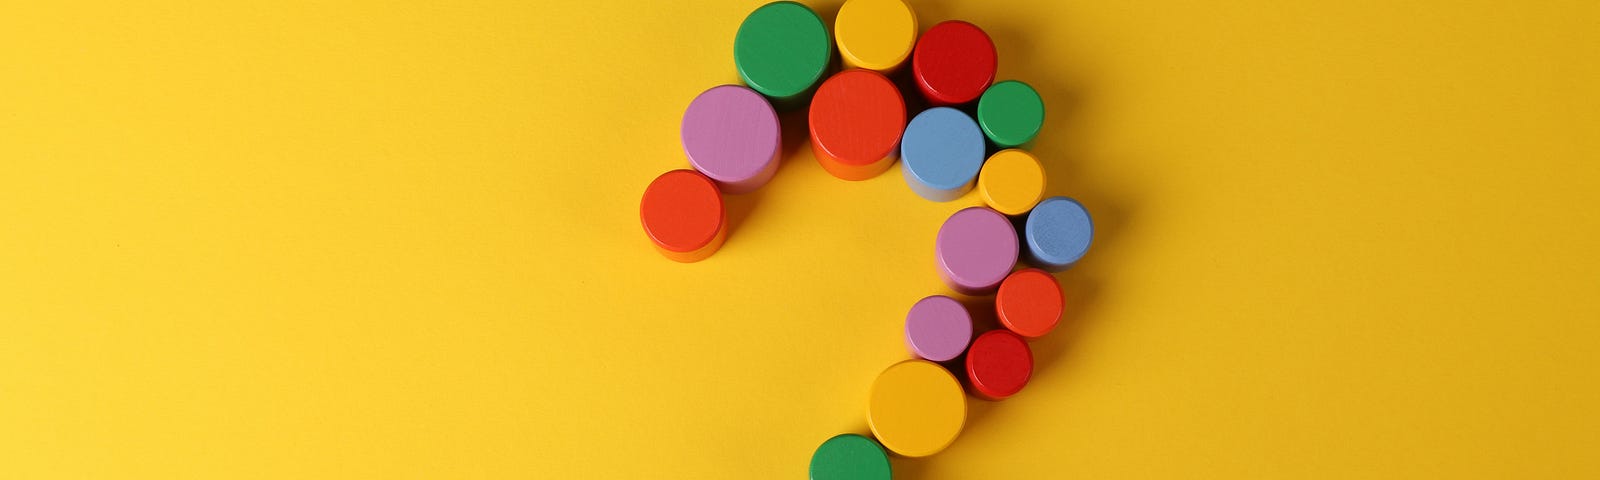 Yellow, Red, Green, and Blue Round Beads in the shape of a question mark.